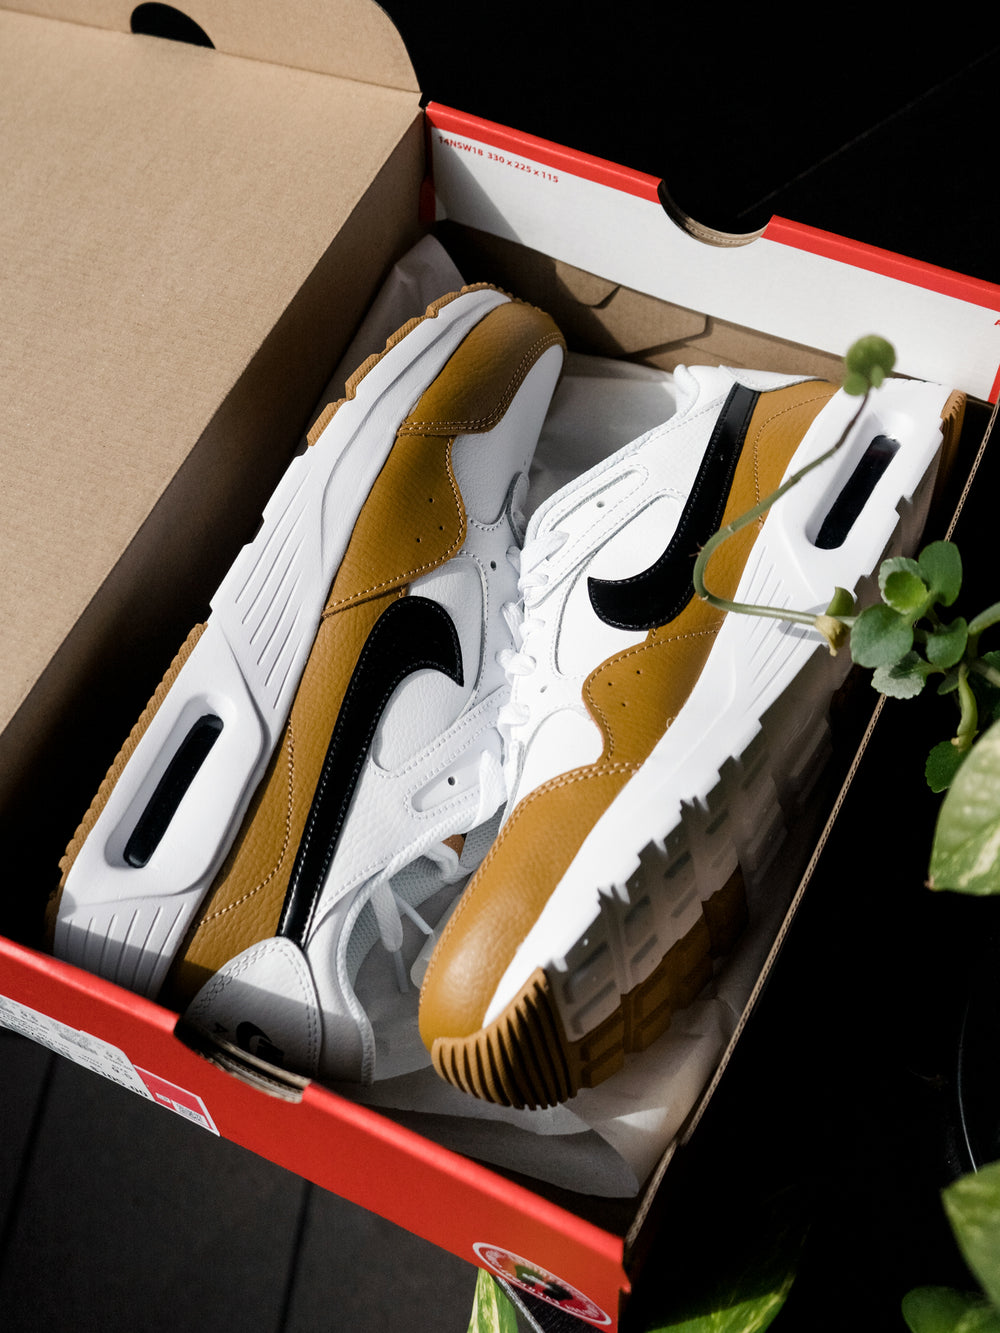 MENS NIKE AIR MAX SC LEATHER SNEAKER - CLEARANCE